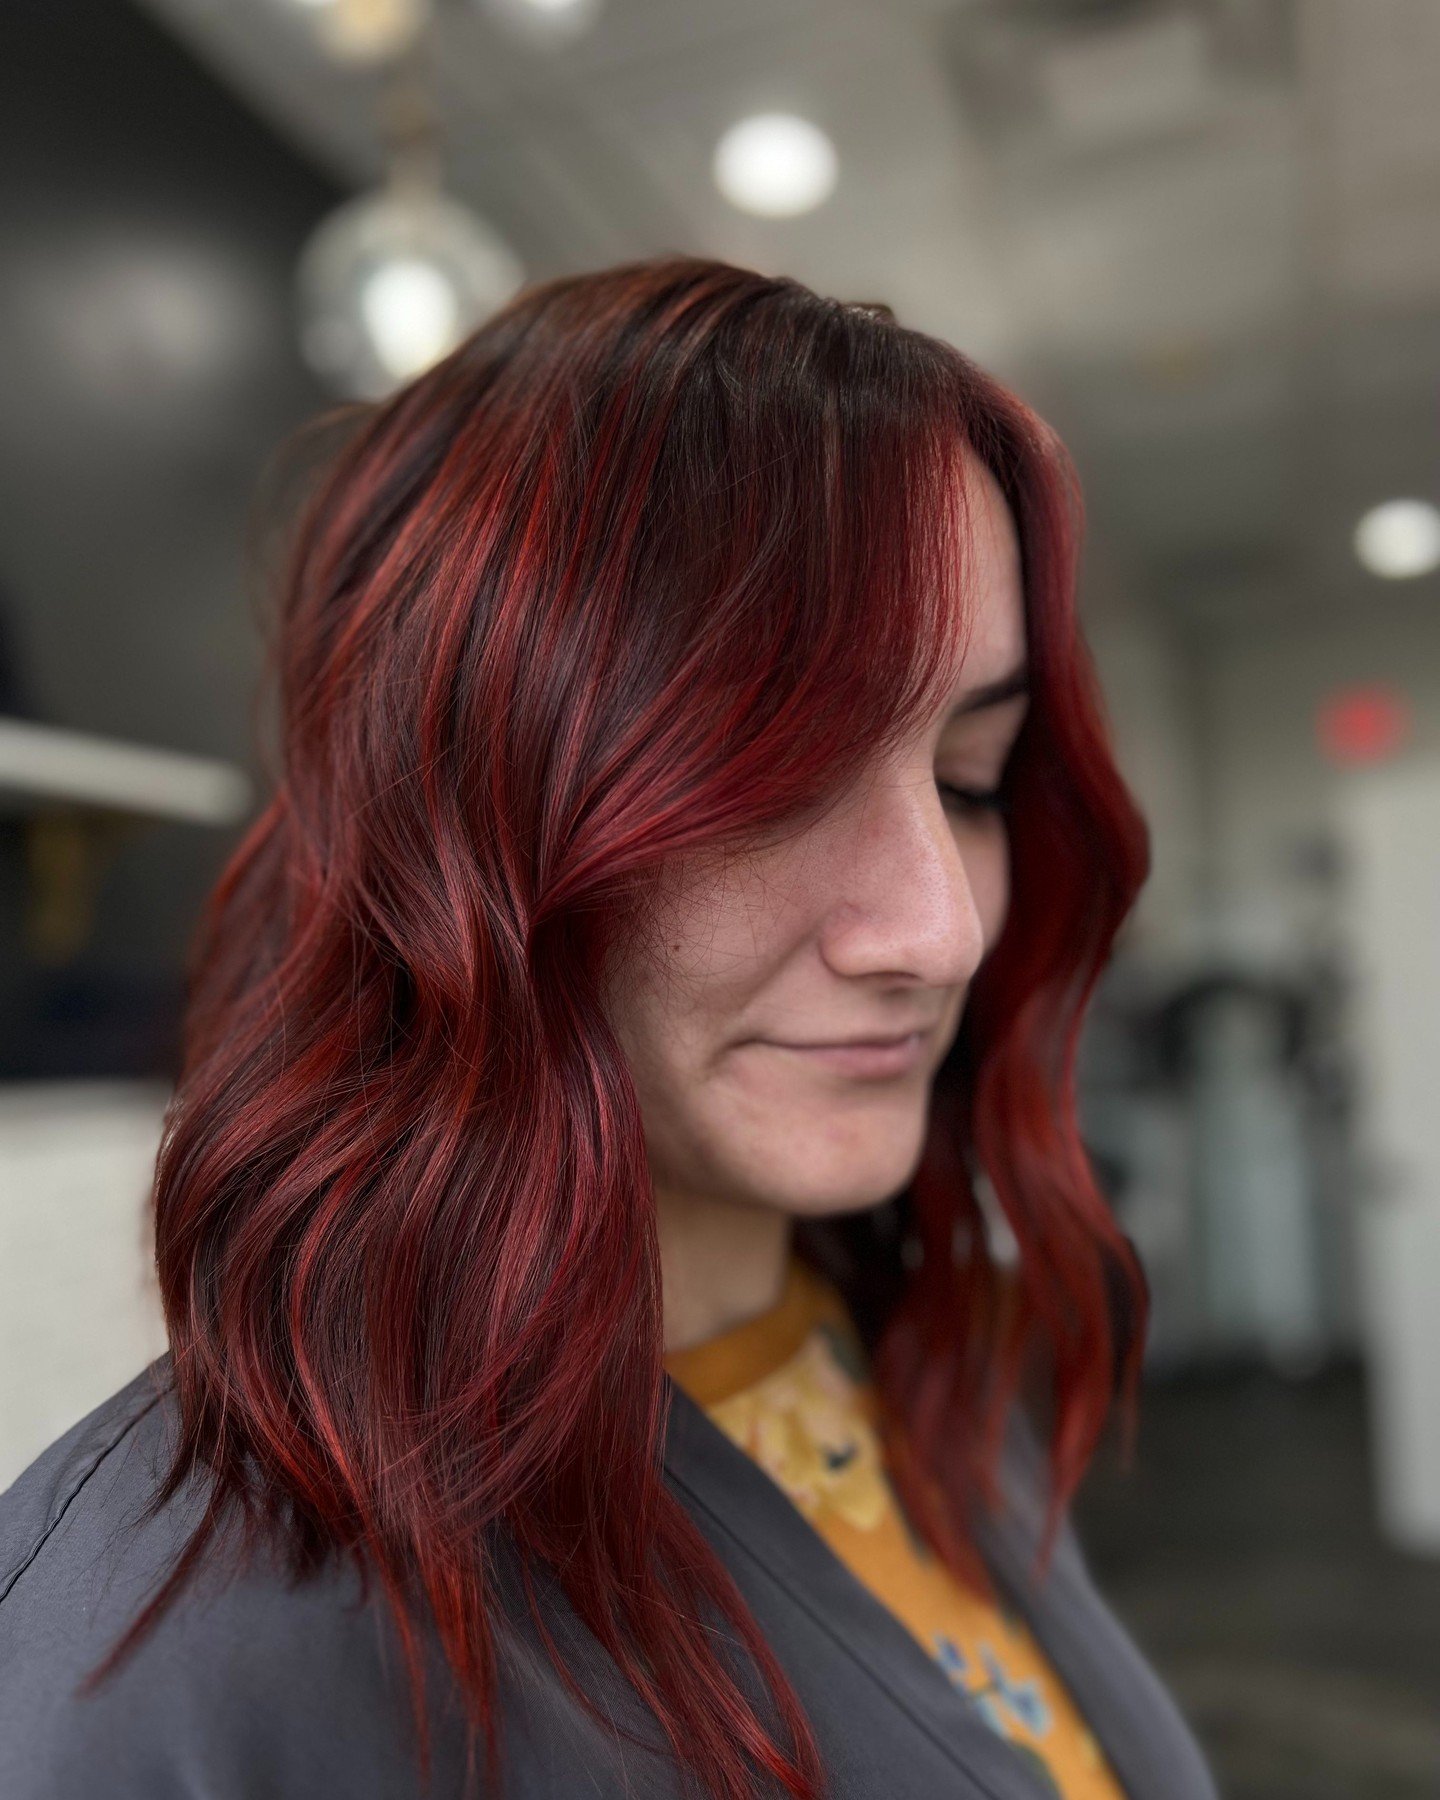 LOVING HIM WAS &bull; RED &bull; ❤️ #LuxeLabStudio

Life is better in color! Whether you're looking to get creative with it or stick to a classic blonde or brunette blend... @navisionbeauty has you covered. 

BOOK &bull; your next appointment at the 